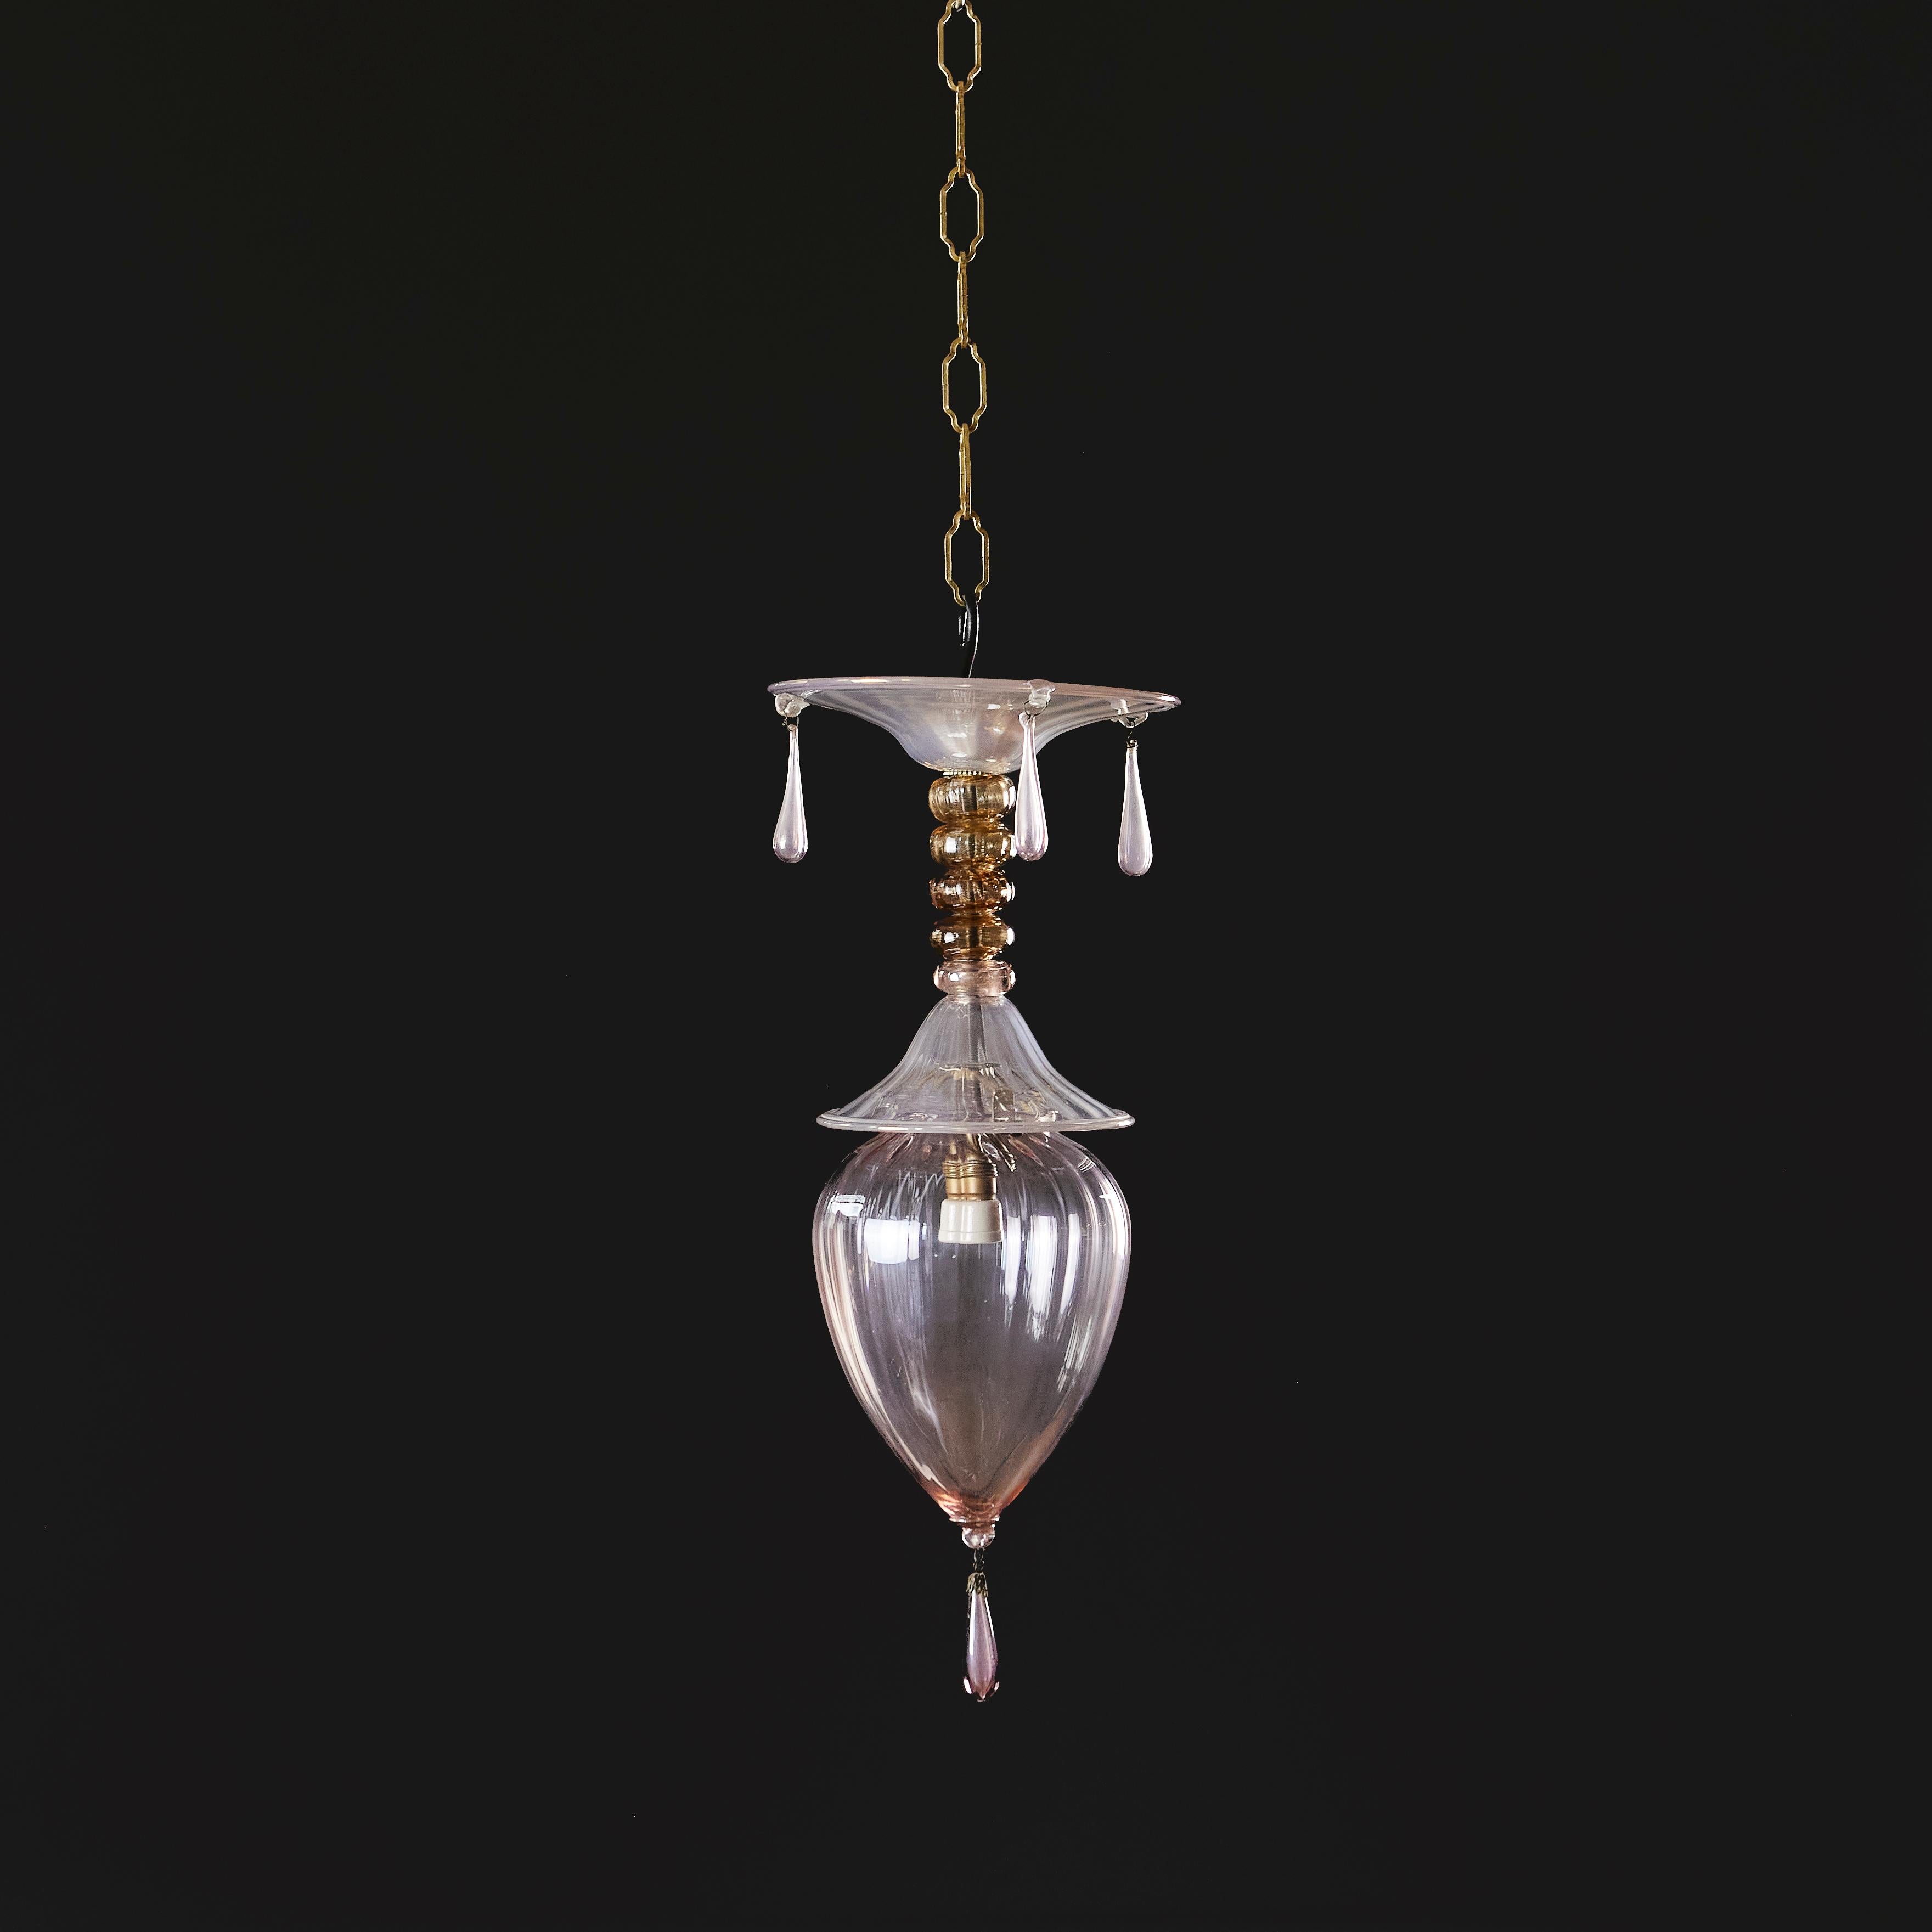 Italy, circa 1926

An early twentieth century pink Murano glass hanging light by Vittorio Zecchin, with teardrop shaped body, and circular top with three droplets. 

Overall height (without chain)     47.00cm

Diameter    15.00cm